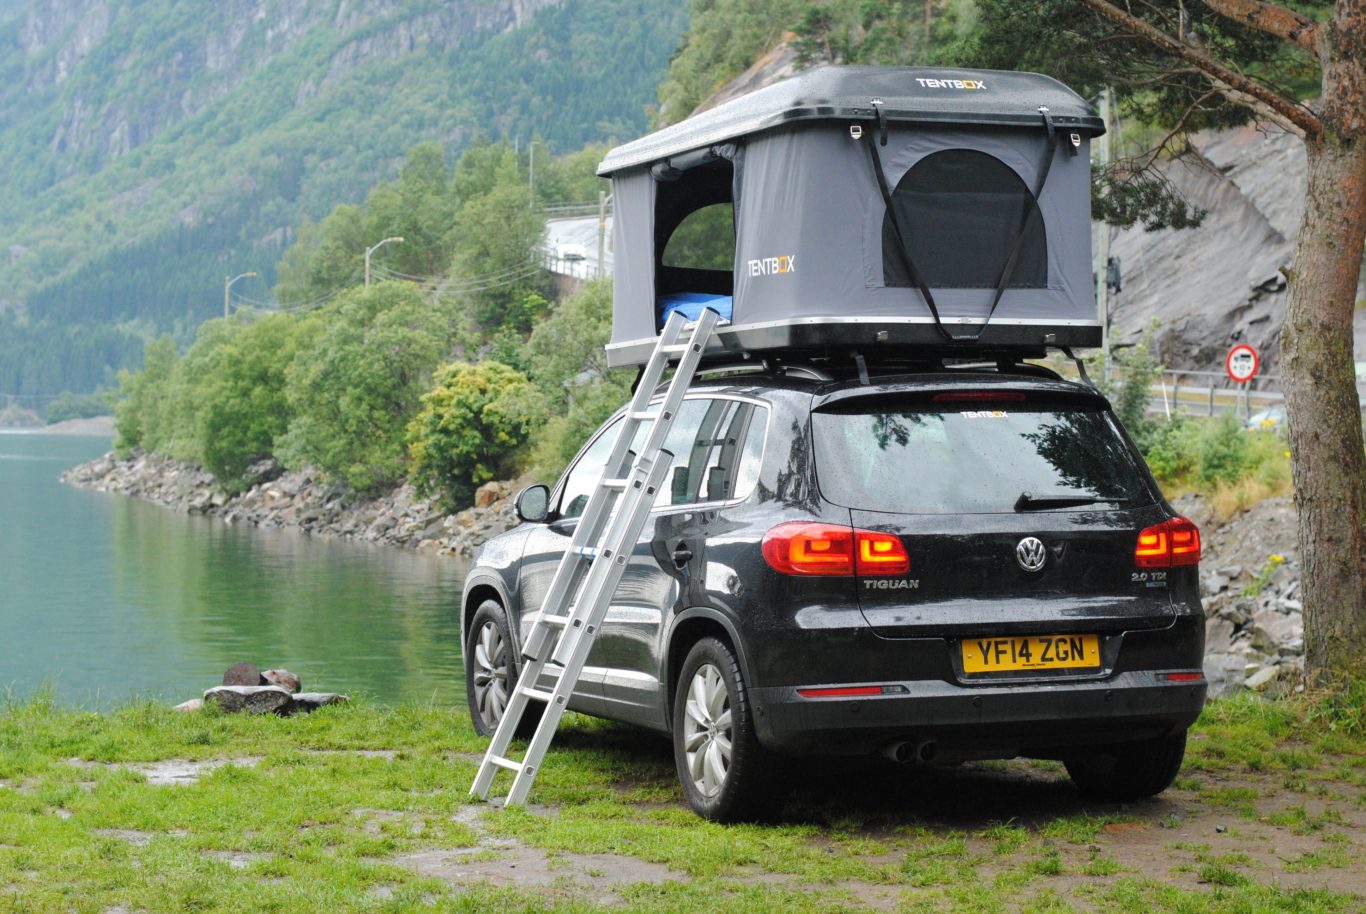 The TentBox may be pricey, but it can be fitted to pretty much any vehicle